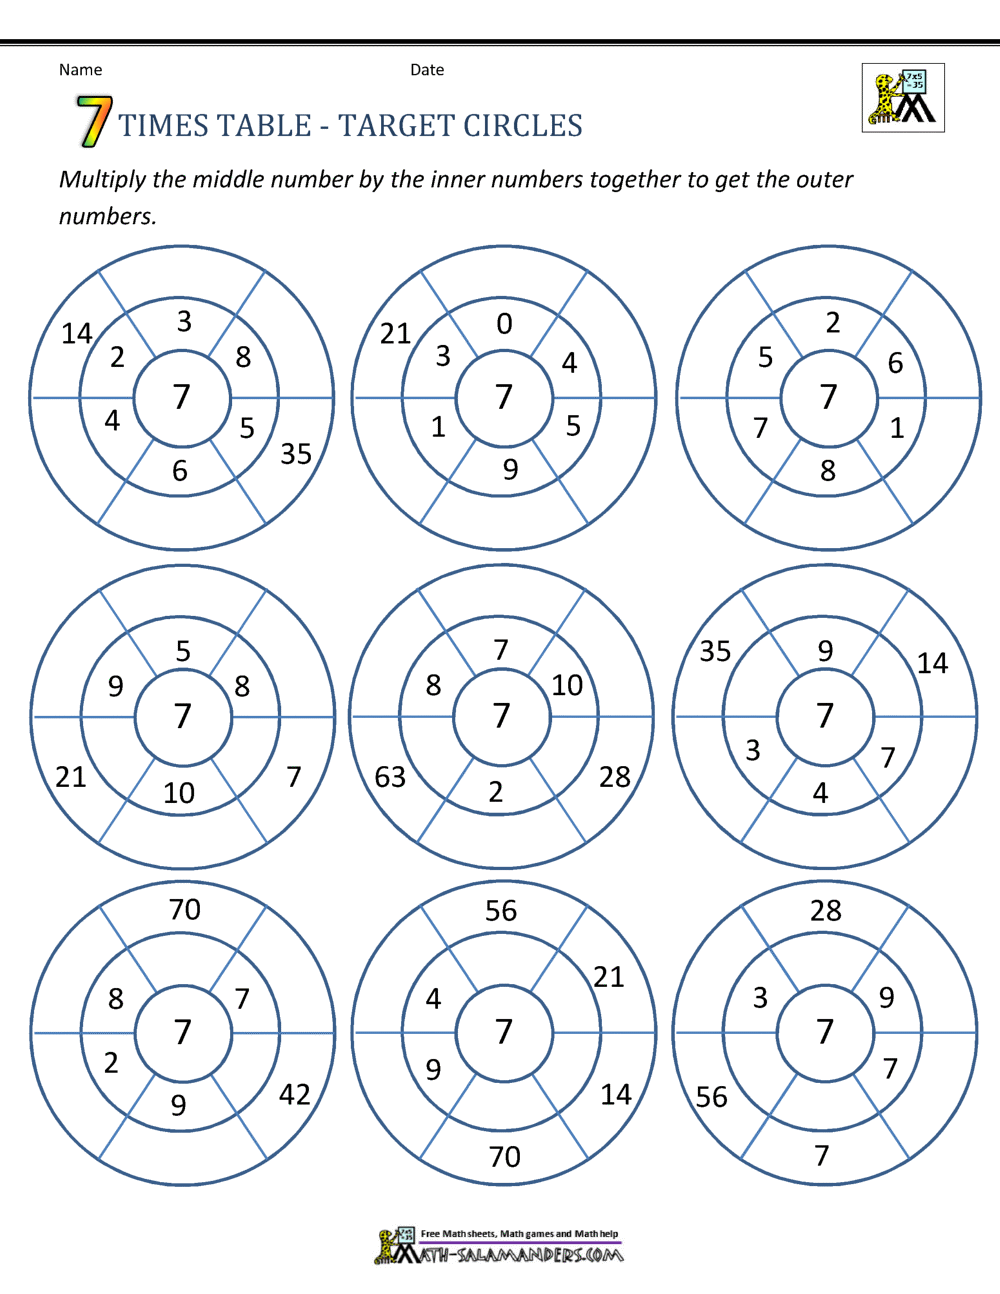 times-tables-for-kids-7-times-table-circles-1-gif-790-1022